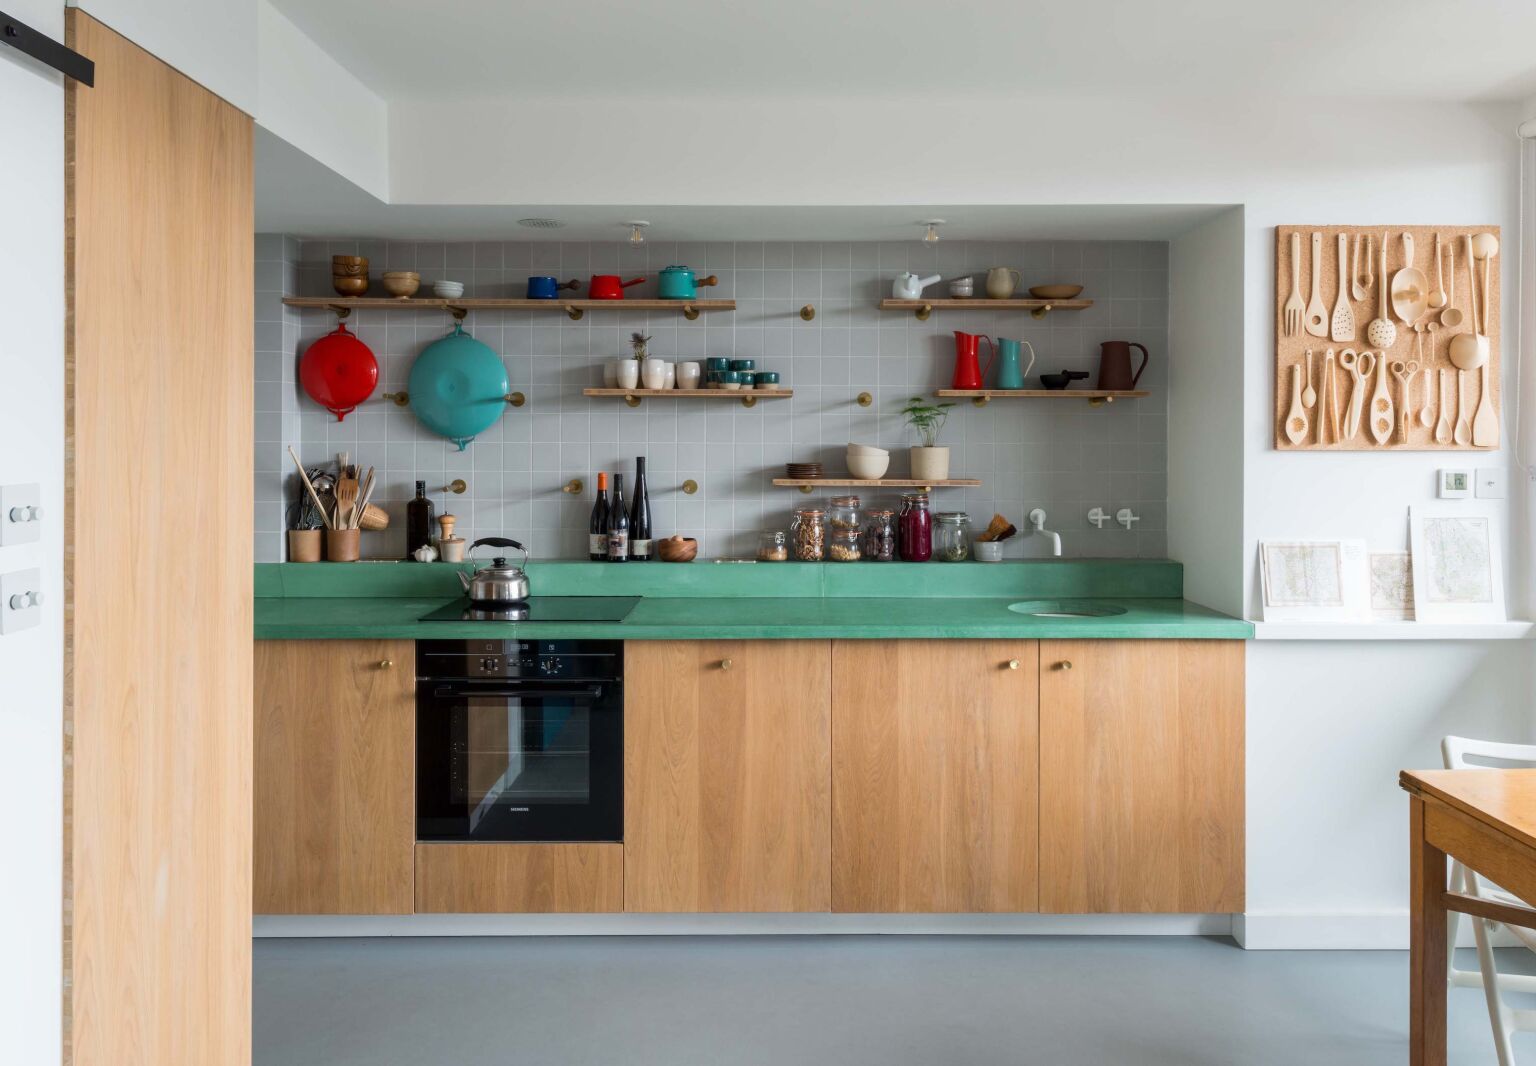 Kitchen of the Week An Architects Colorful Modern Cottage Kitchen in a London Highrise portrait 3